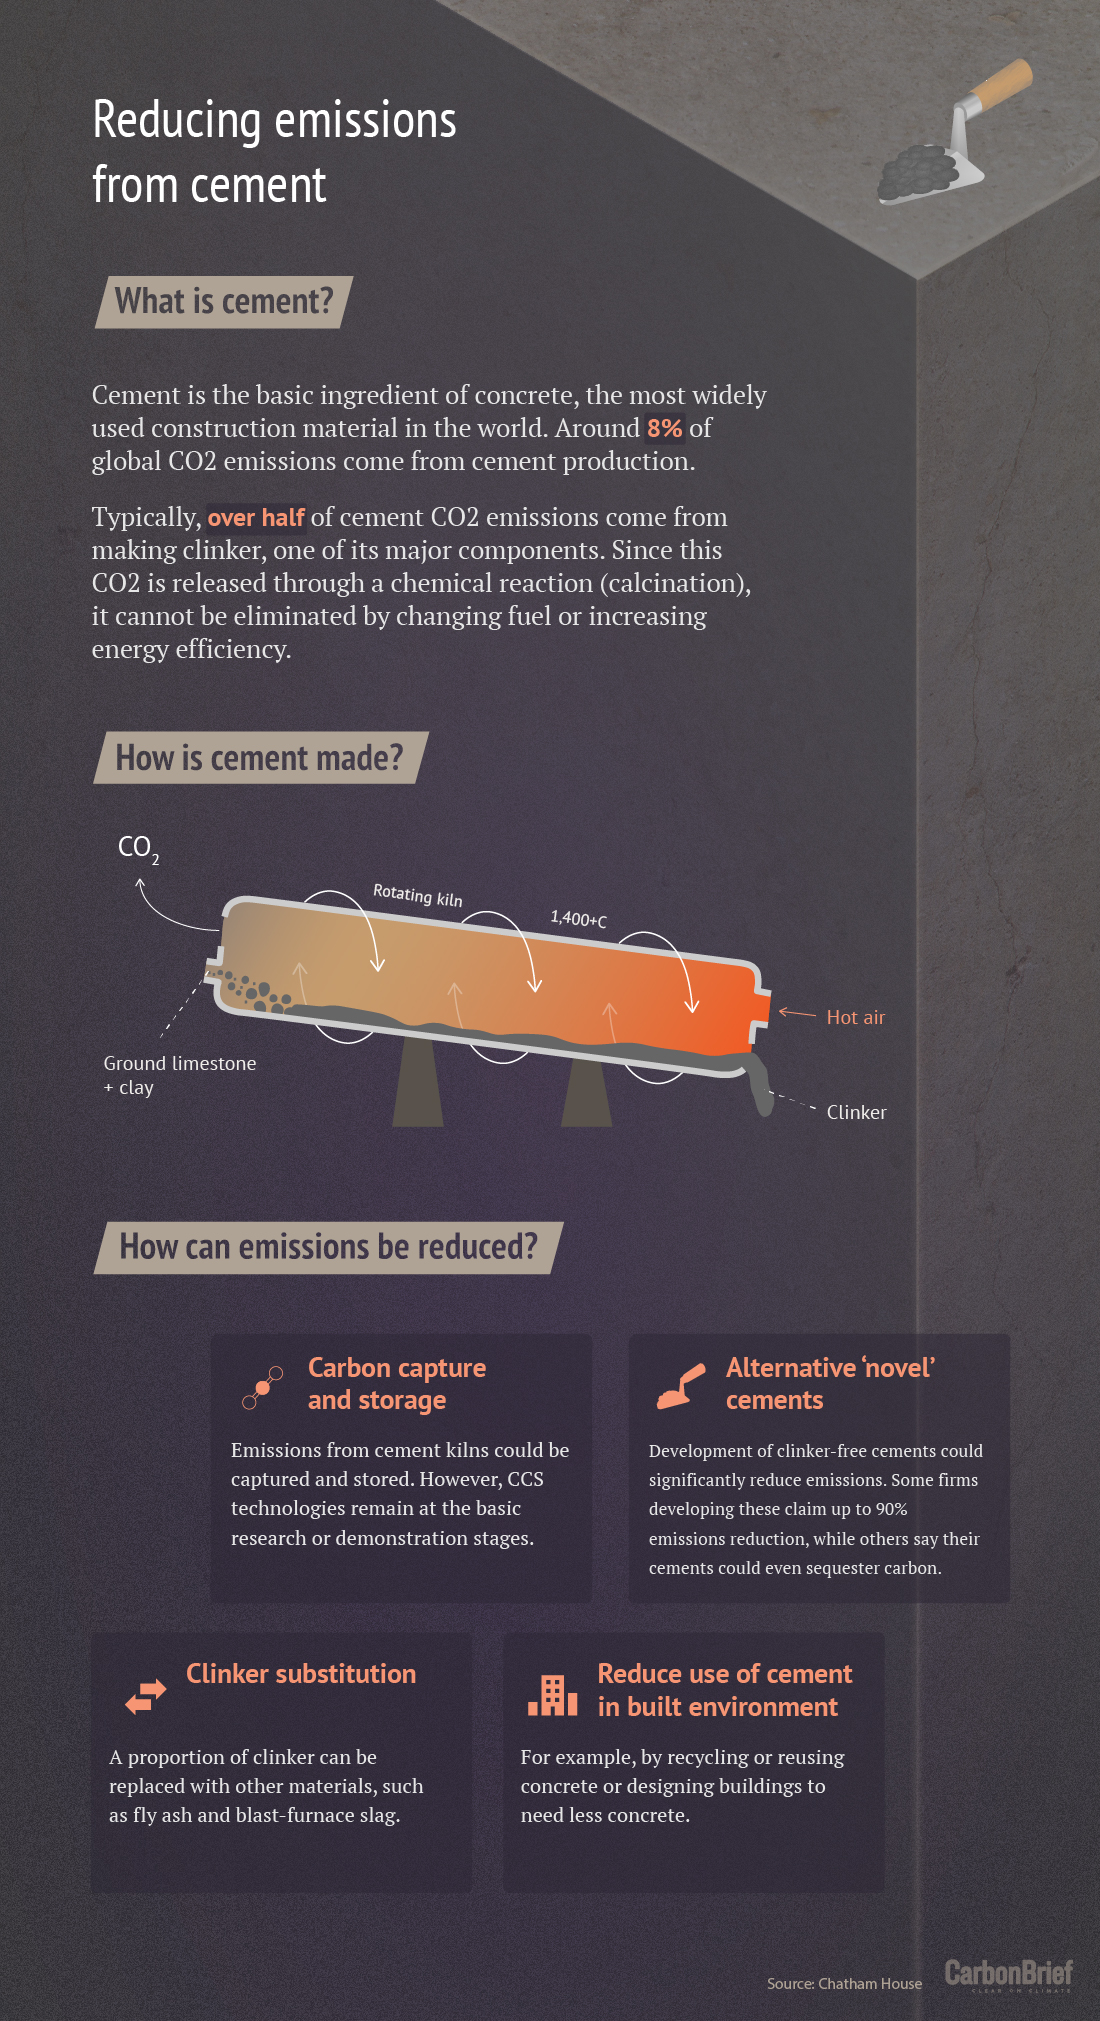 Reducing emissions from cement. Infographic by Rosamund Pearce for Carbon Brief.